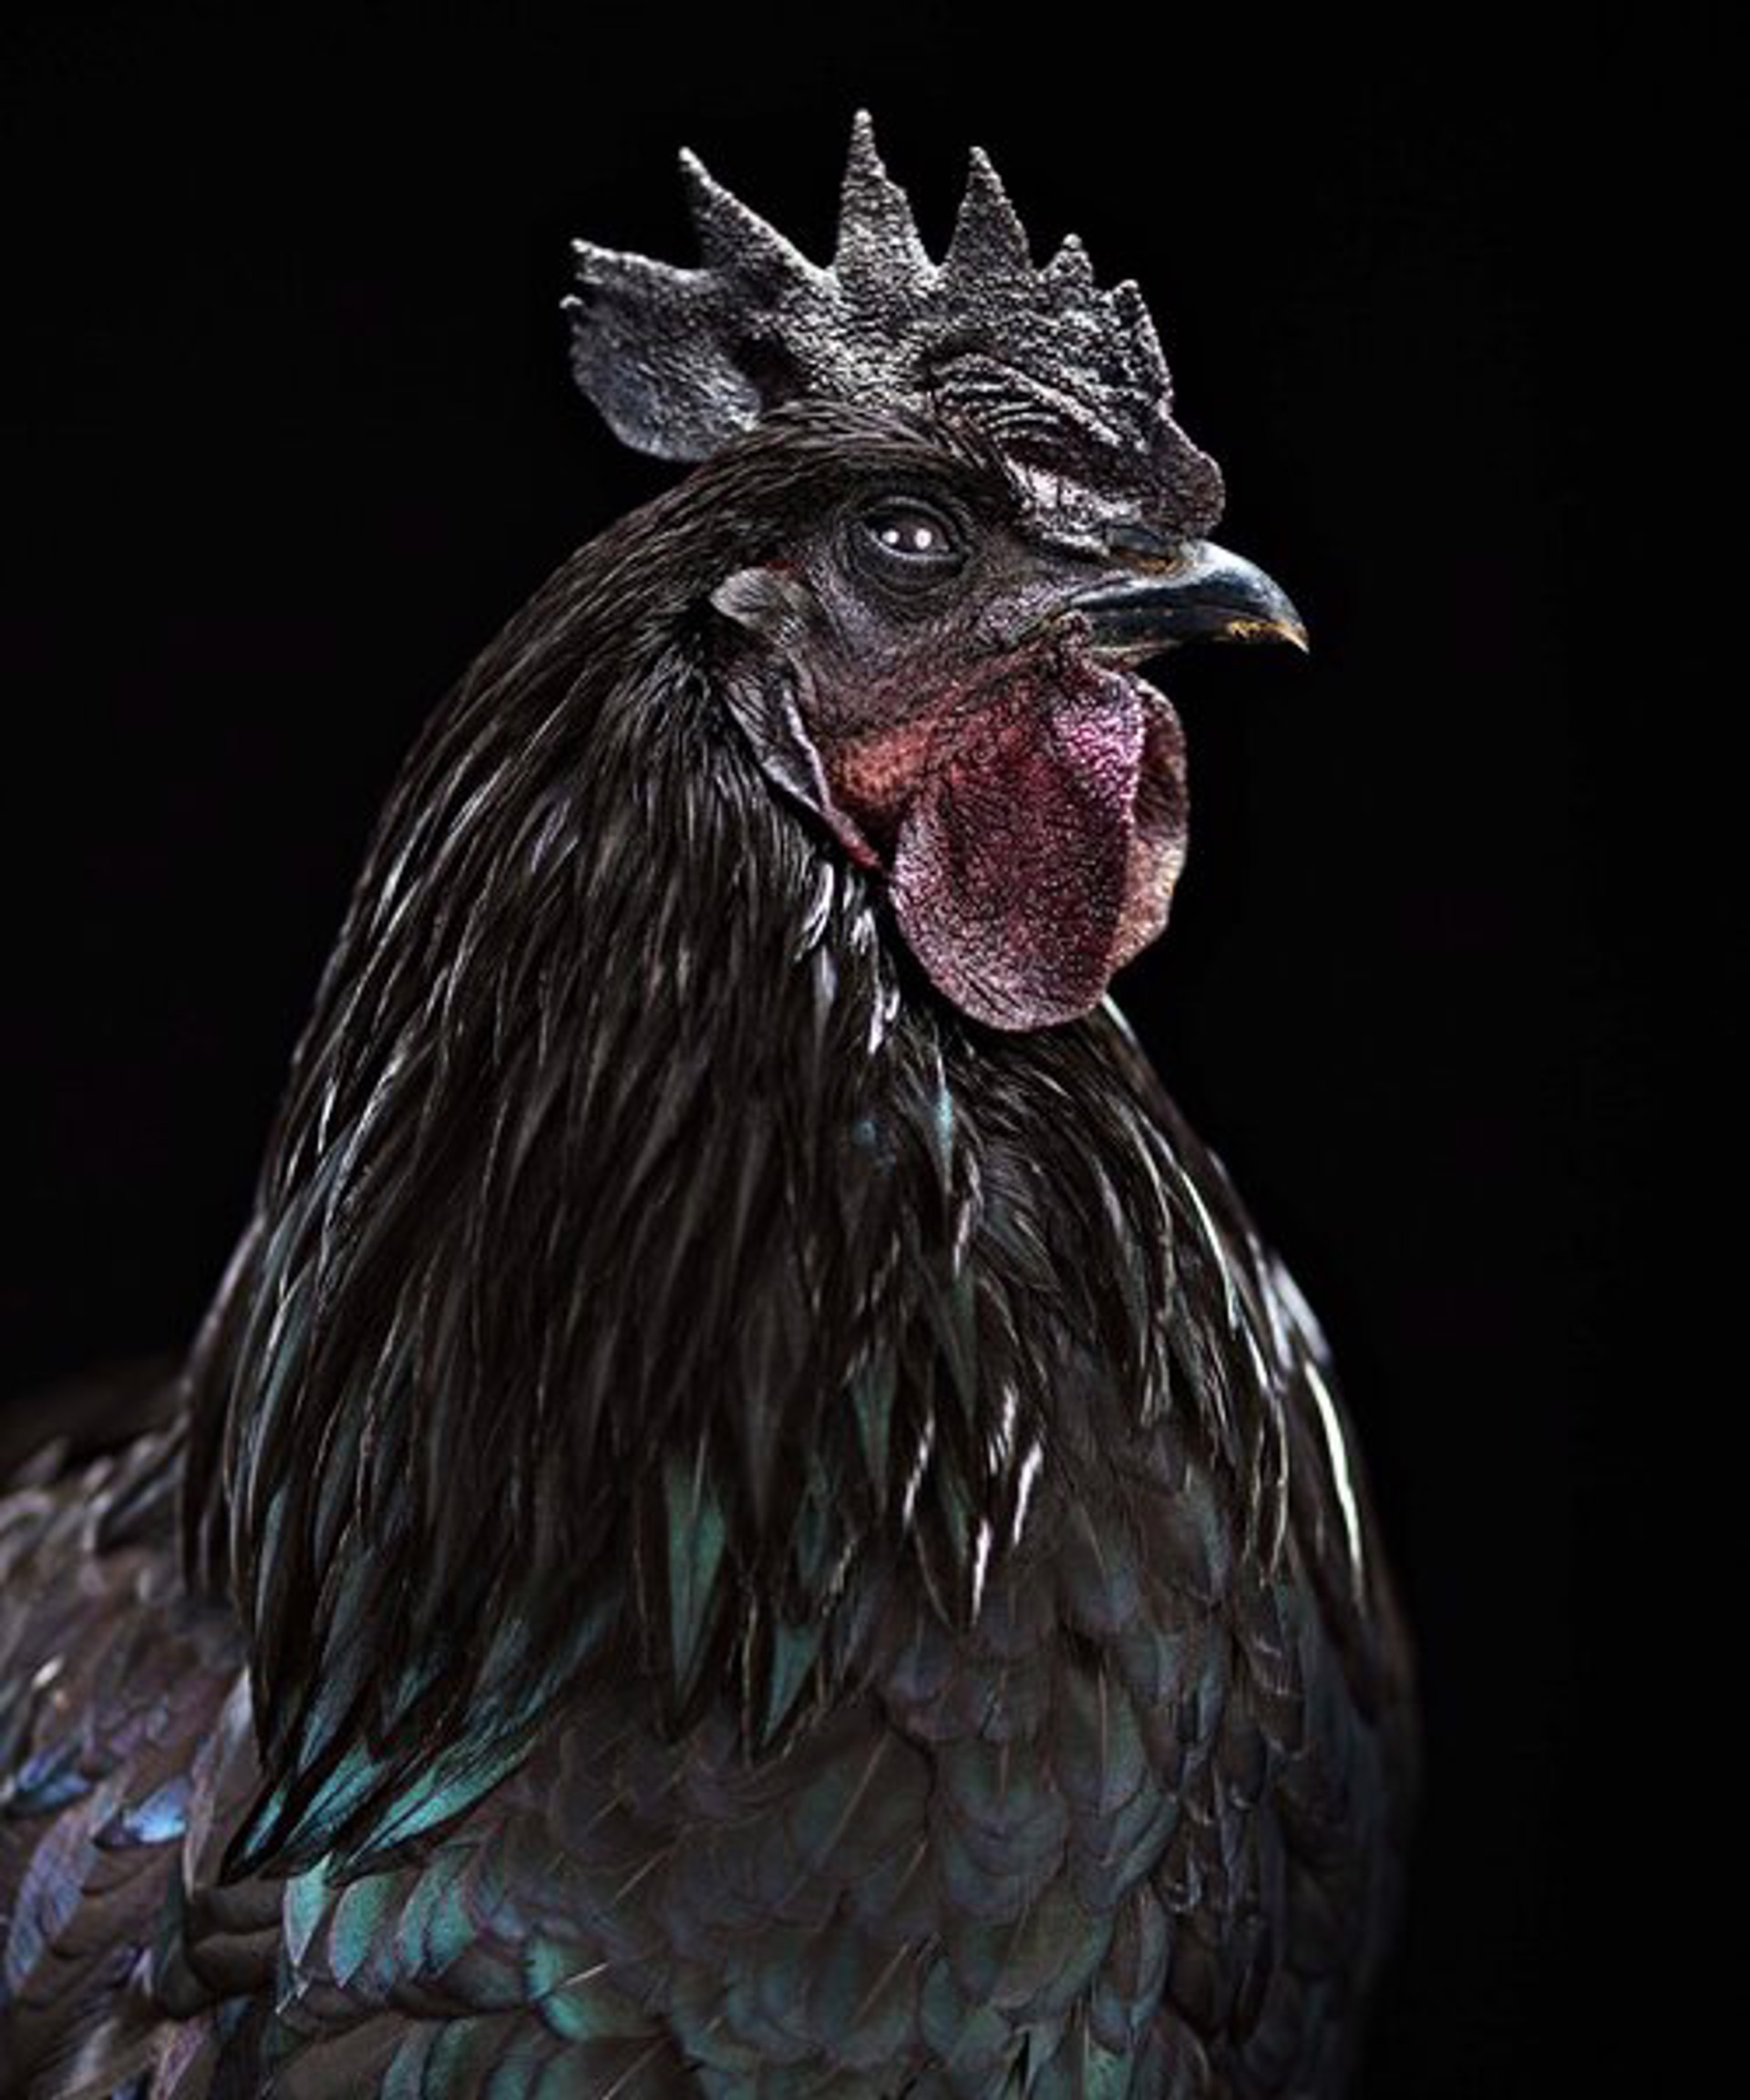 The Colonel, Aym Cemani Rooster Portrait 855 by Evan Kafka